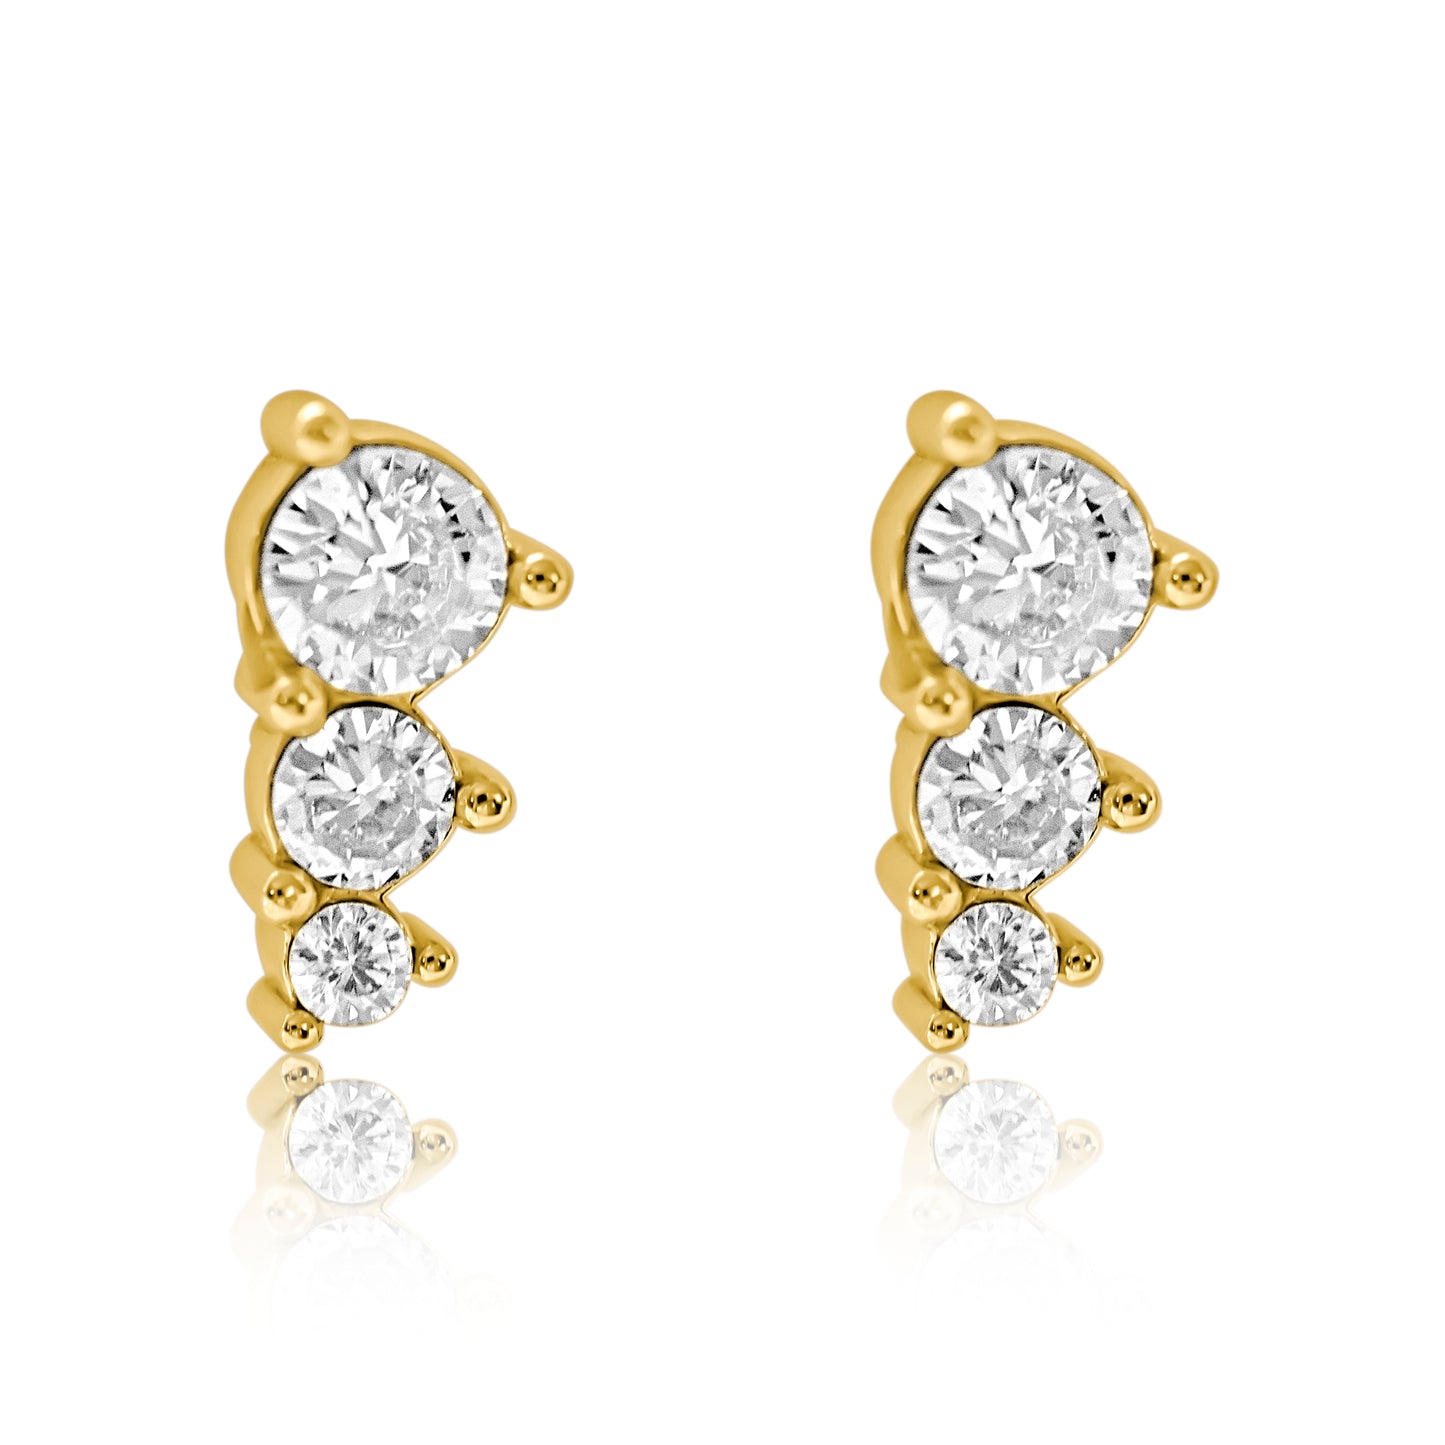 Close up front view. Women's Stainless Steel Three-Stone Cubic Zirconia Gold Earrings, Hypoallergenic and Waterproof, Elegant Fashion Jewelry